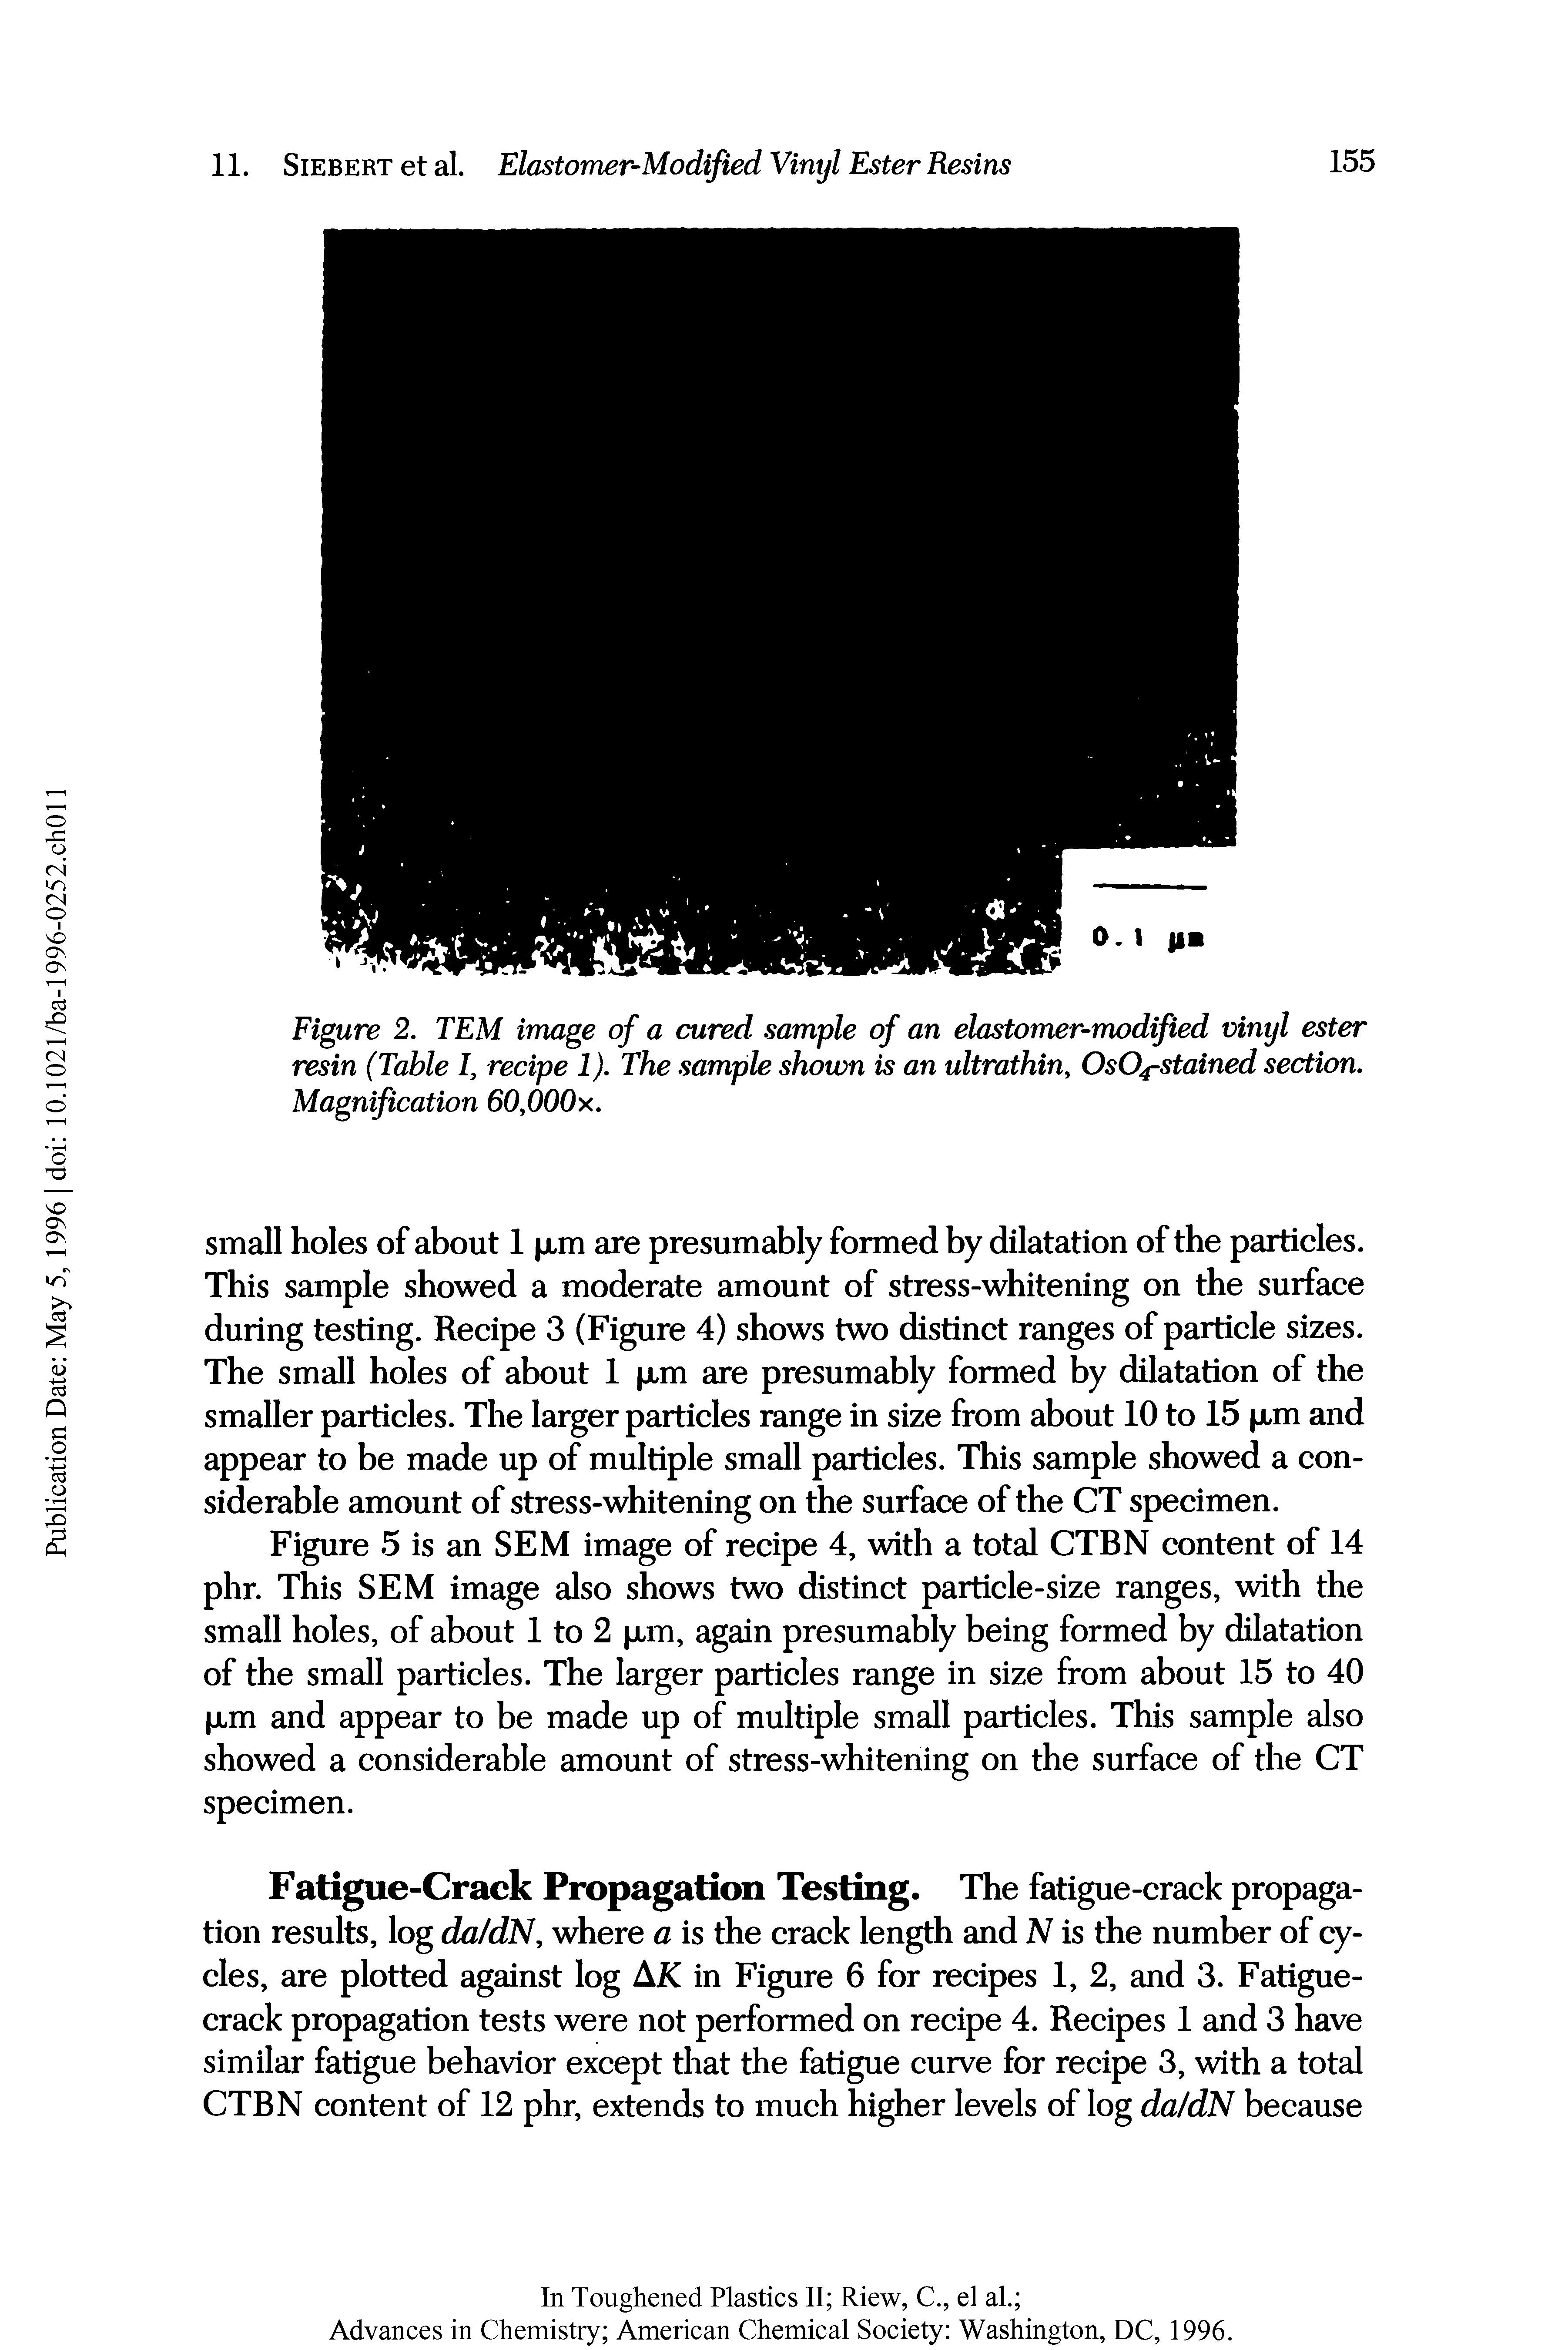 Figure 2. TEM image of a cured sample of an elastomer-modified vinyl ester resin (Table I, recipe 1). The sample shown is an ultrathin, OsO stained section. Magnification 60,000x.